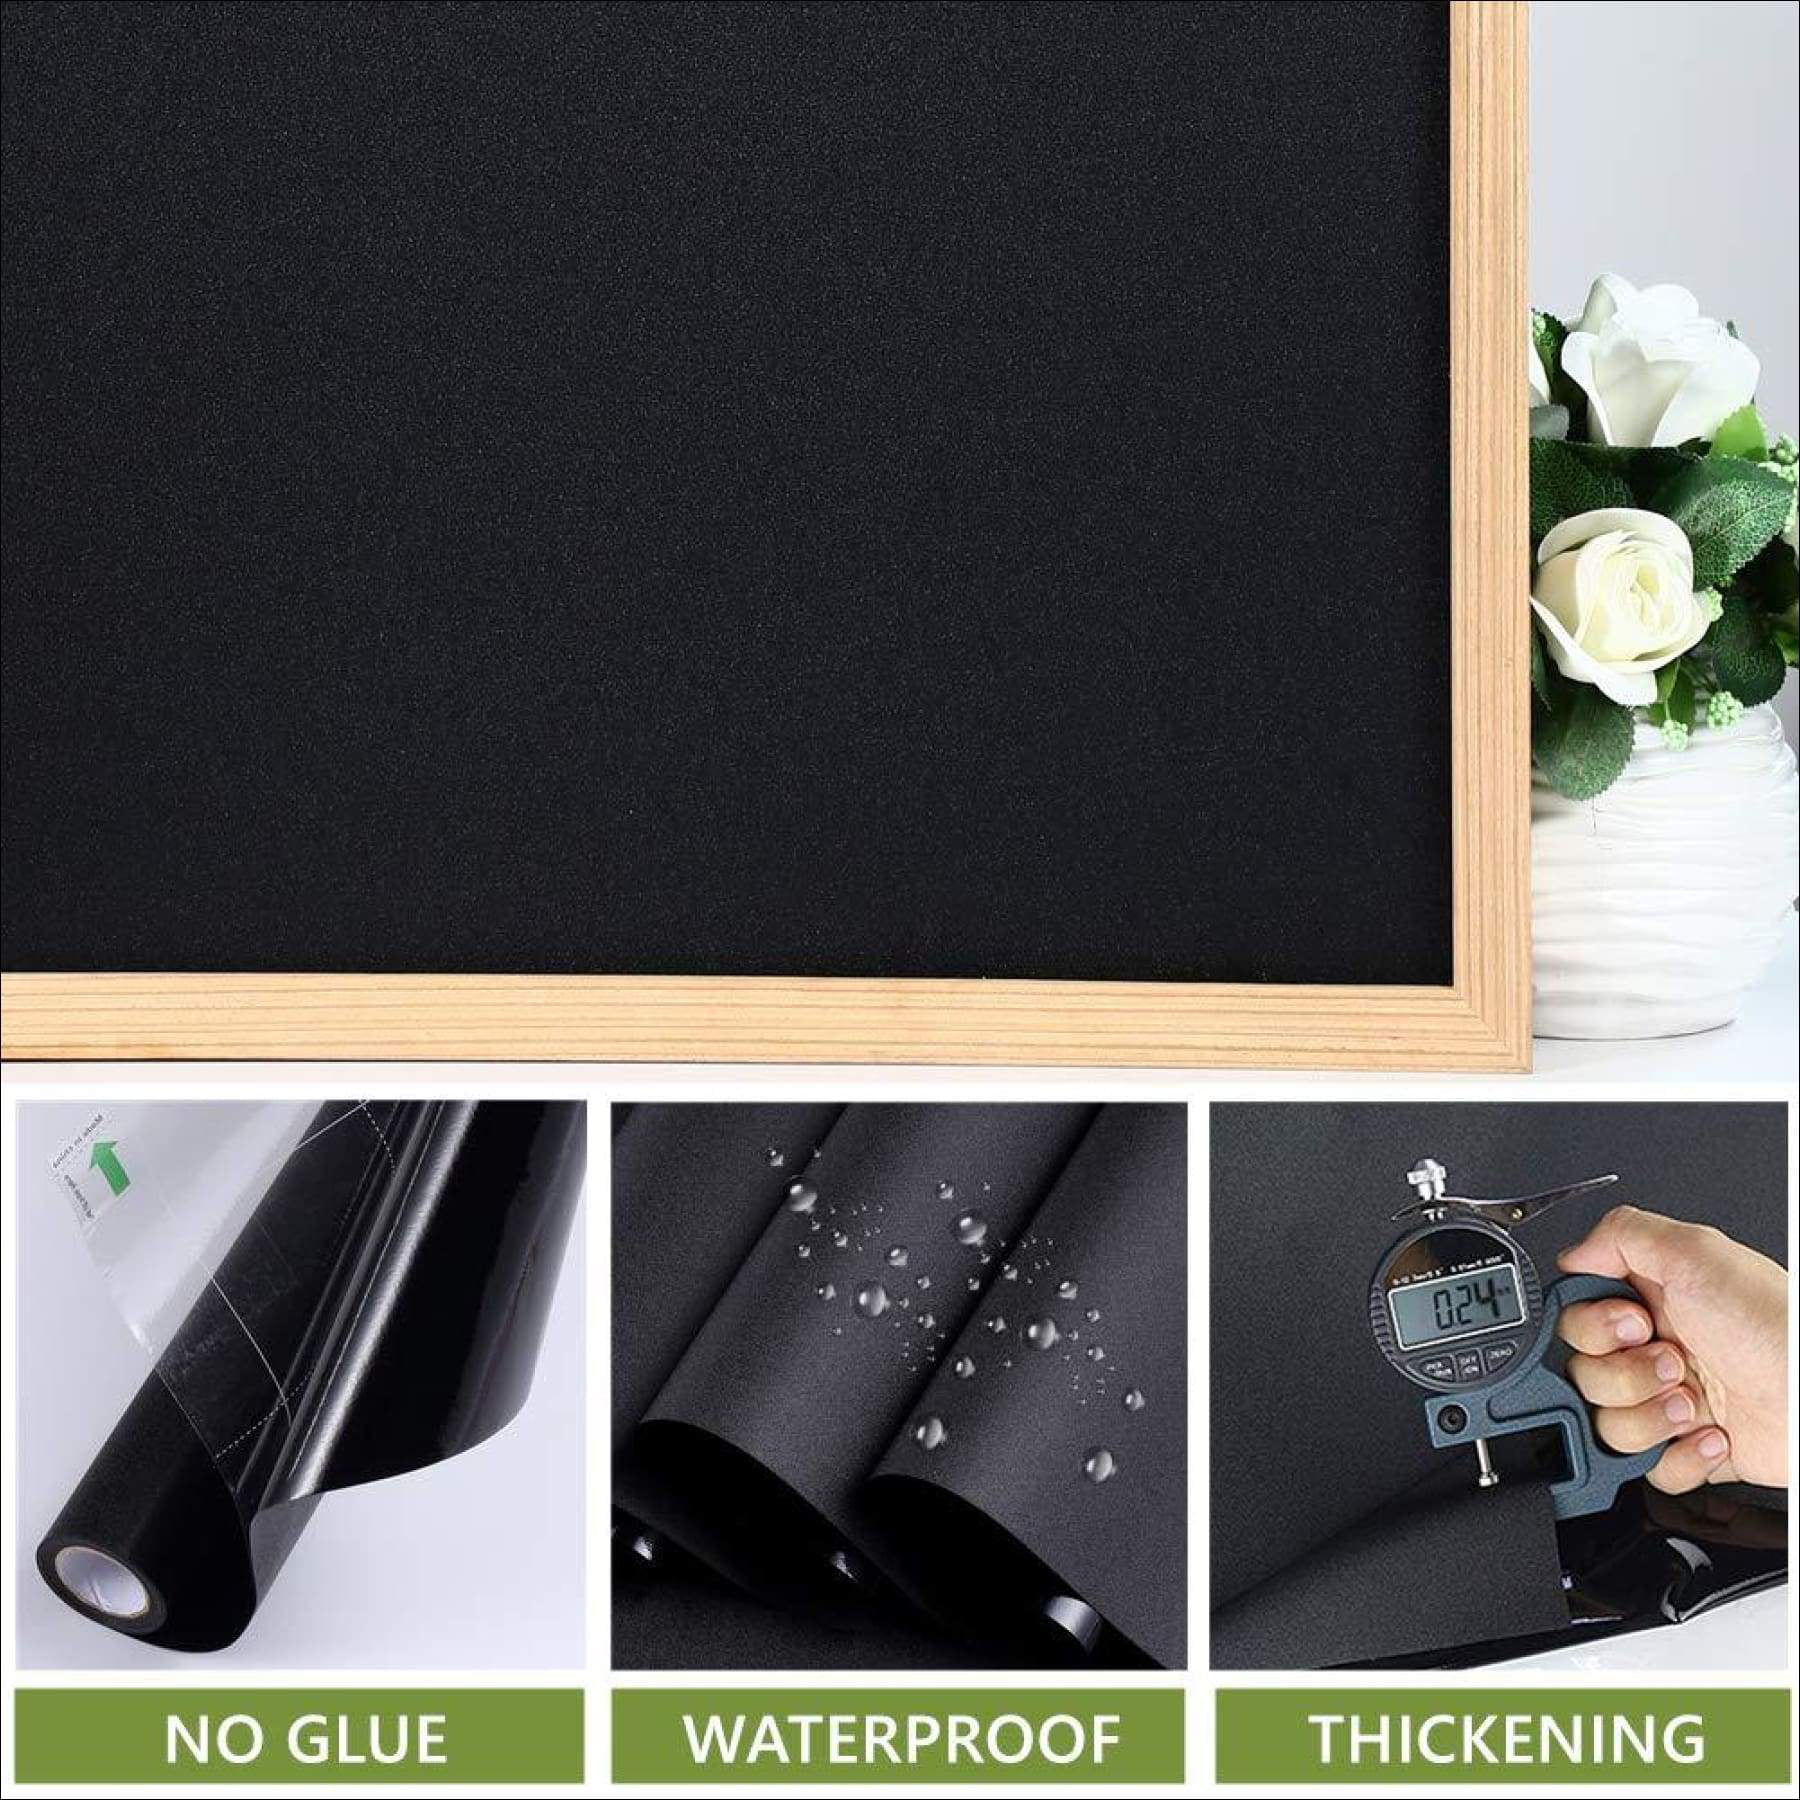 Window Film Black Tint Cover Static Cling Total Blackout Privacy 17.7 x 78.7 in. 